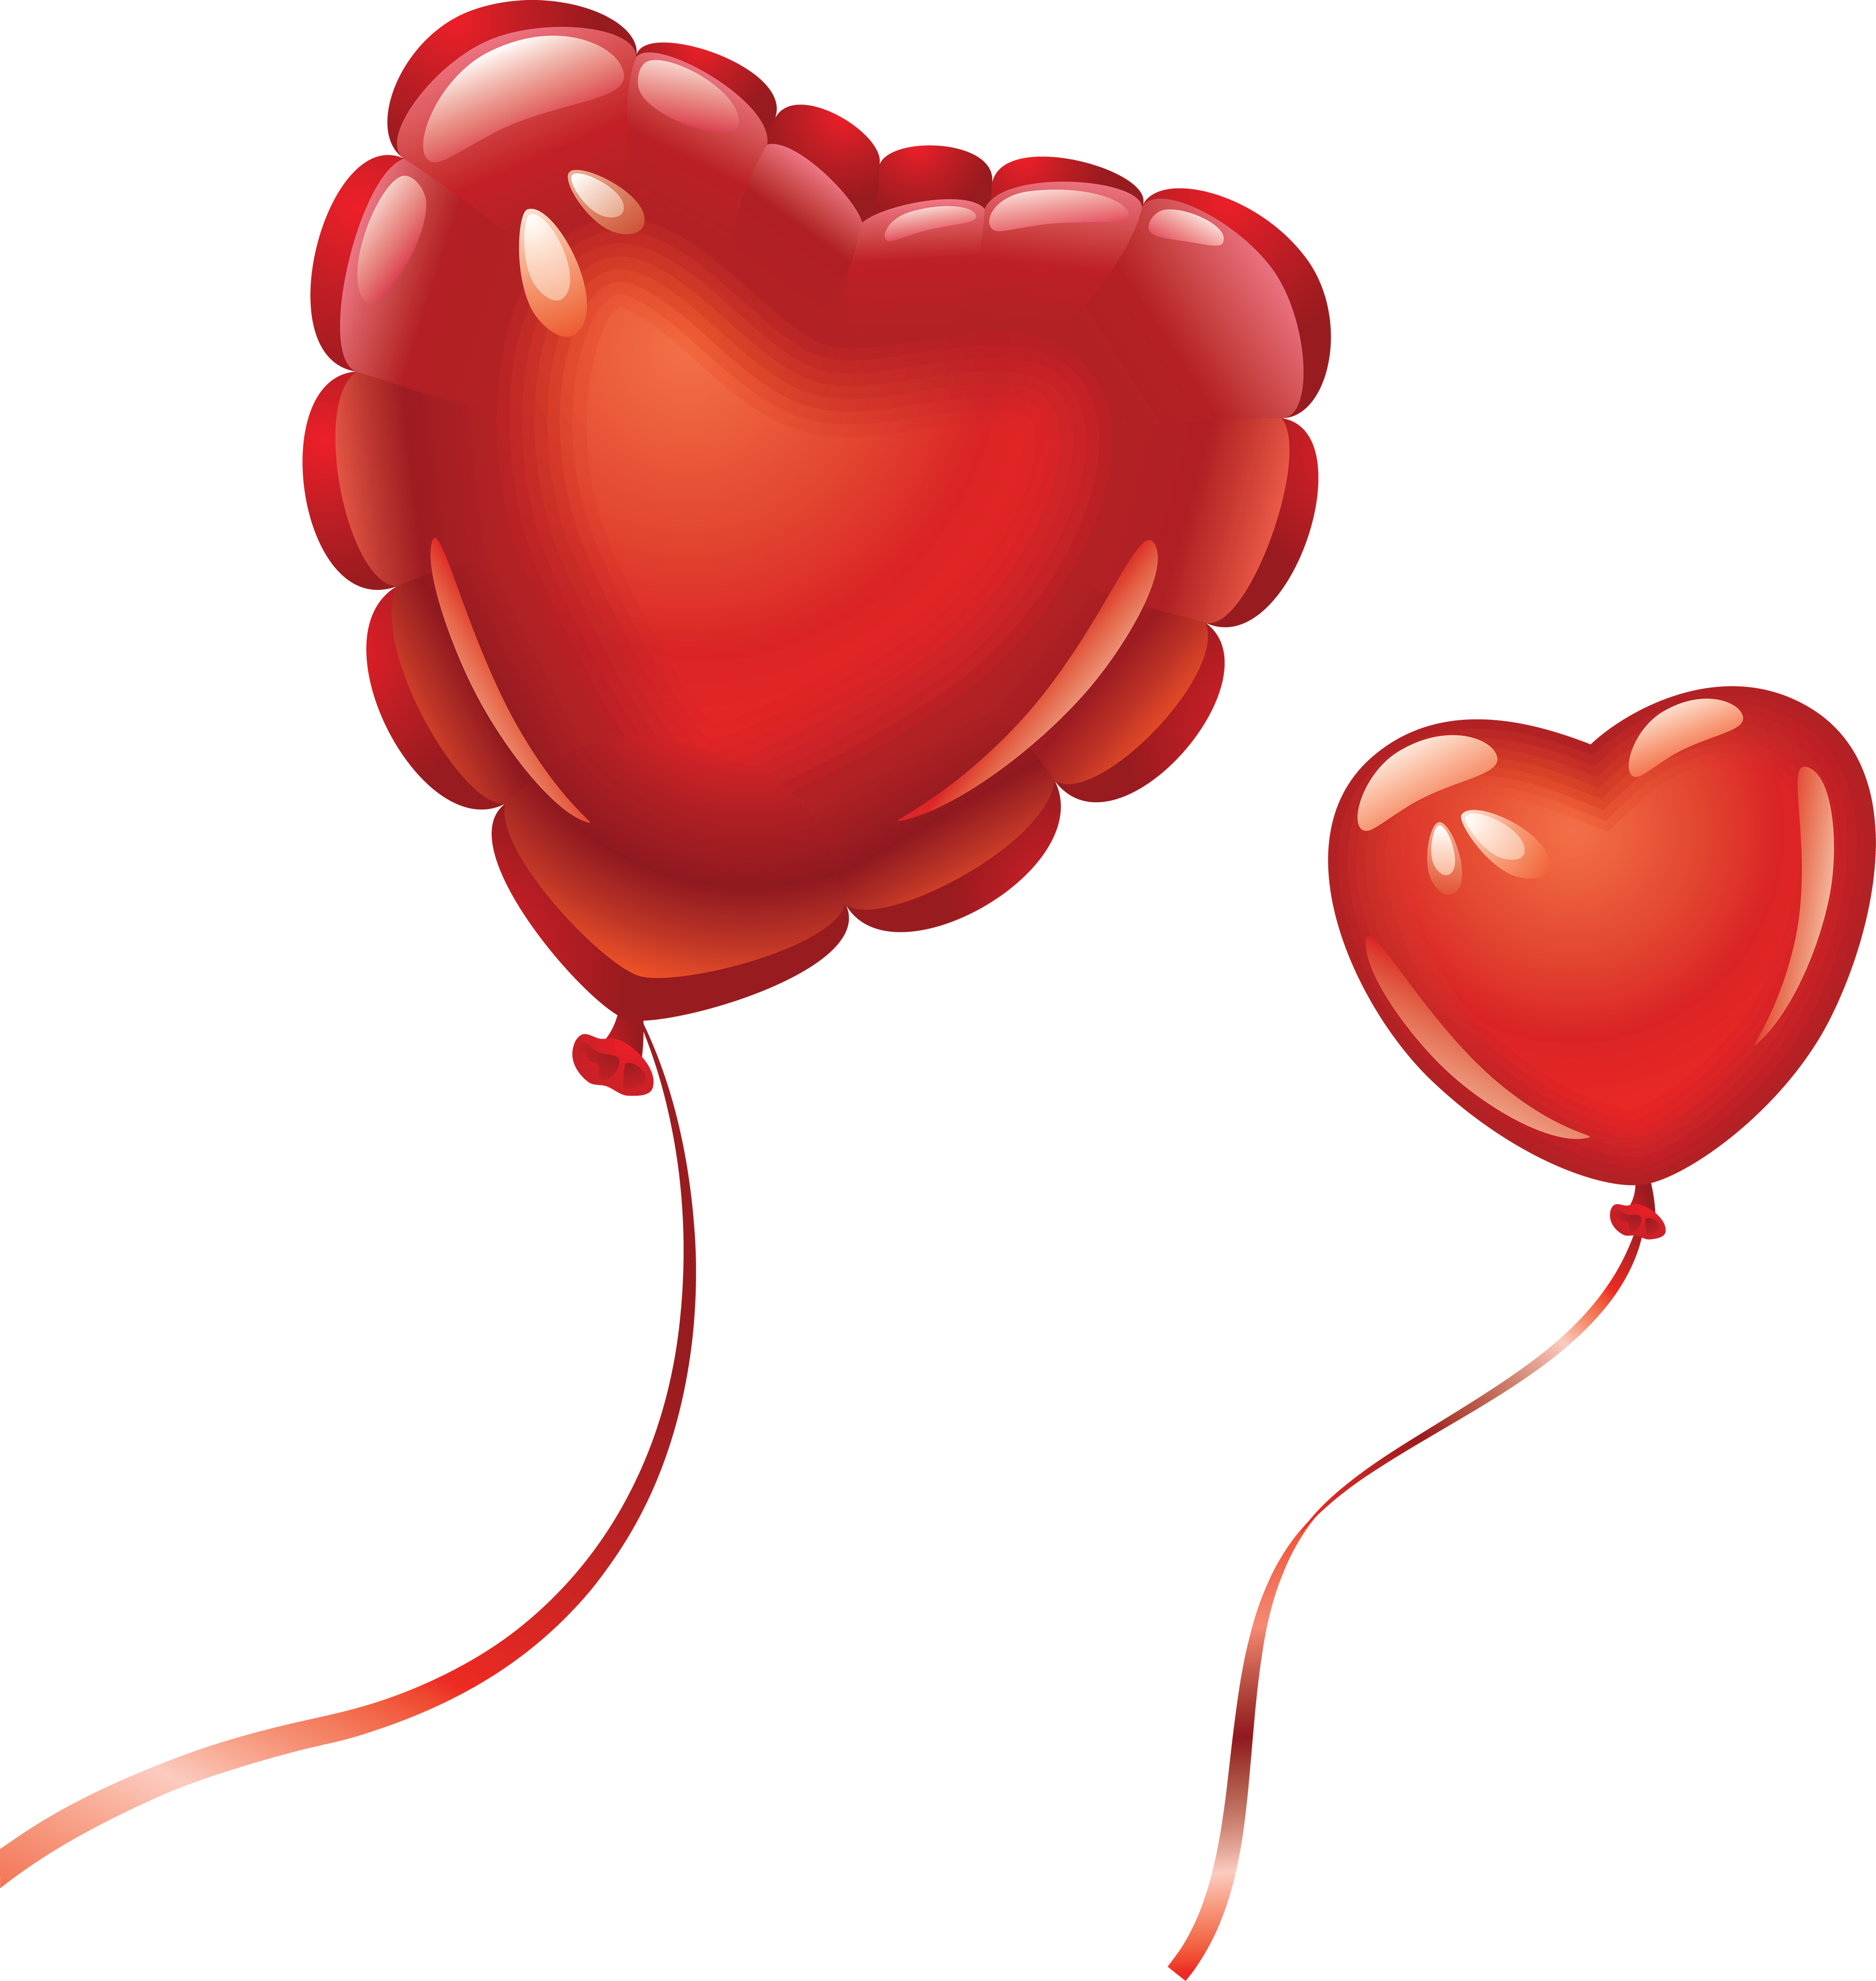 Heart Red Balloons Transparent Image